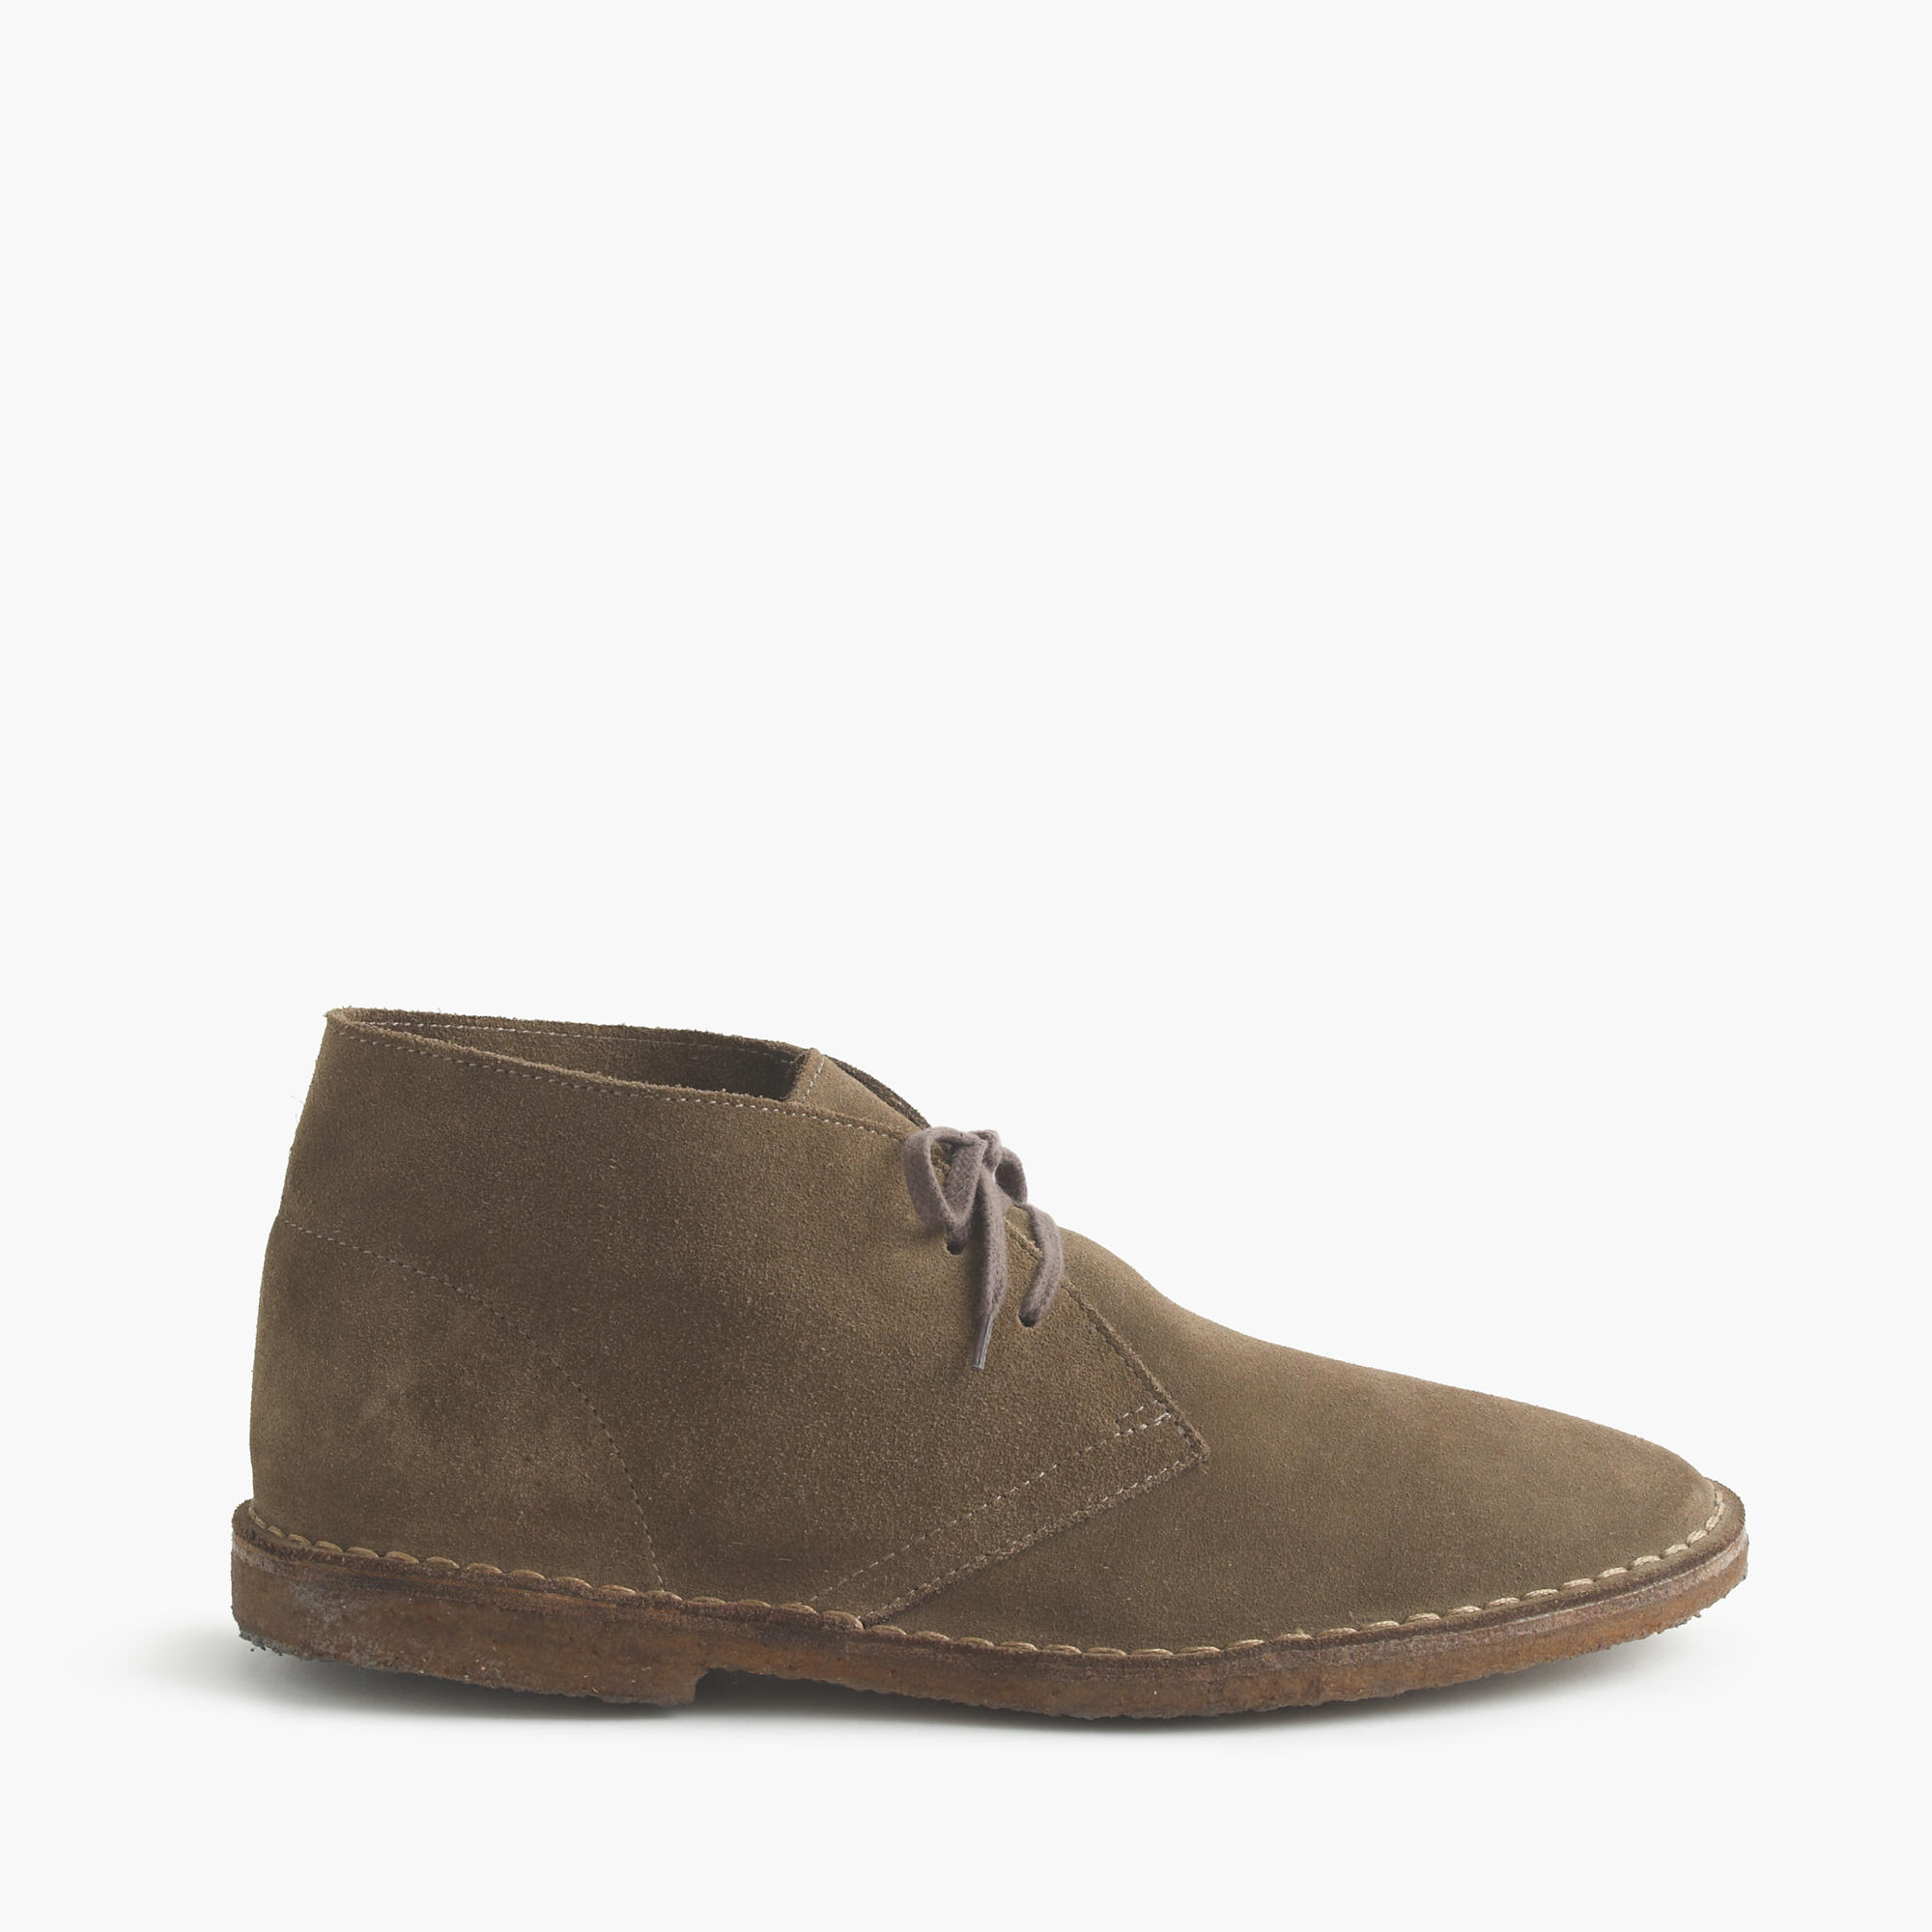 Classic Macalister Boots In Suede : Men's Shoes | J.Crew